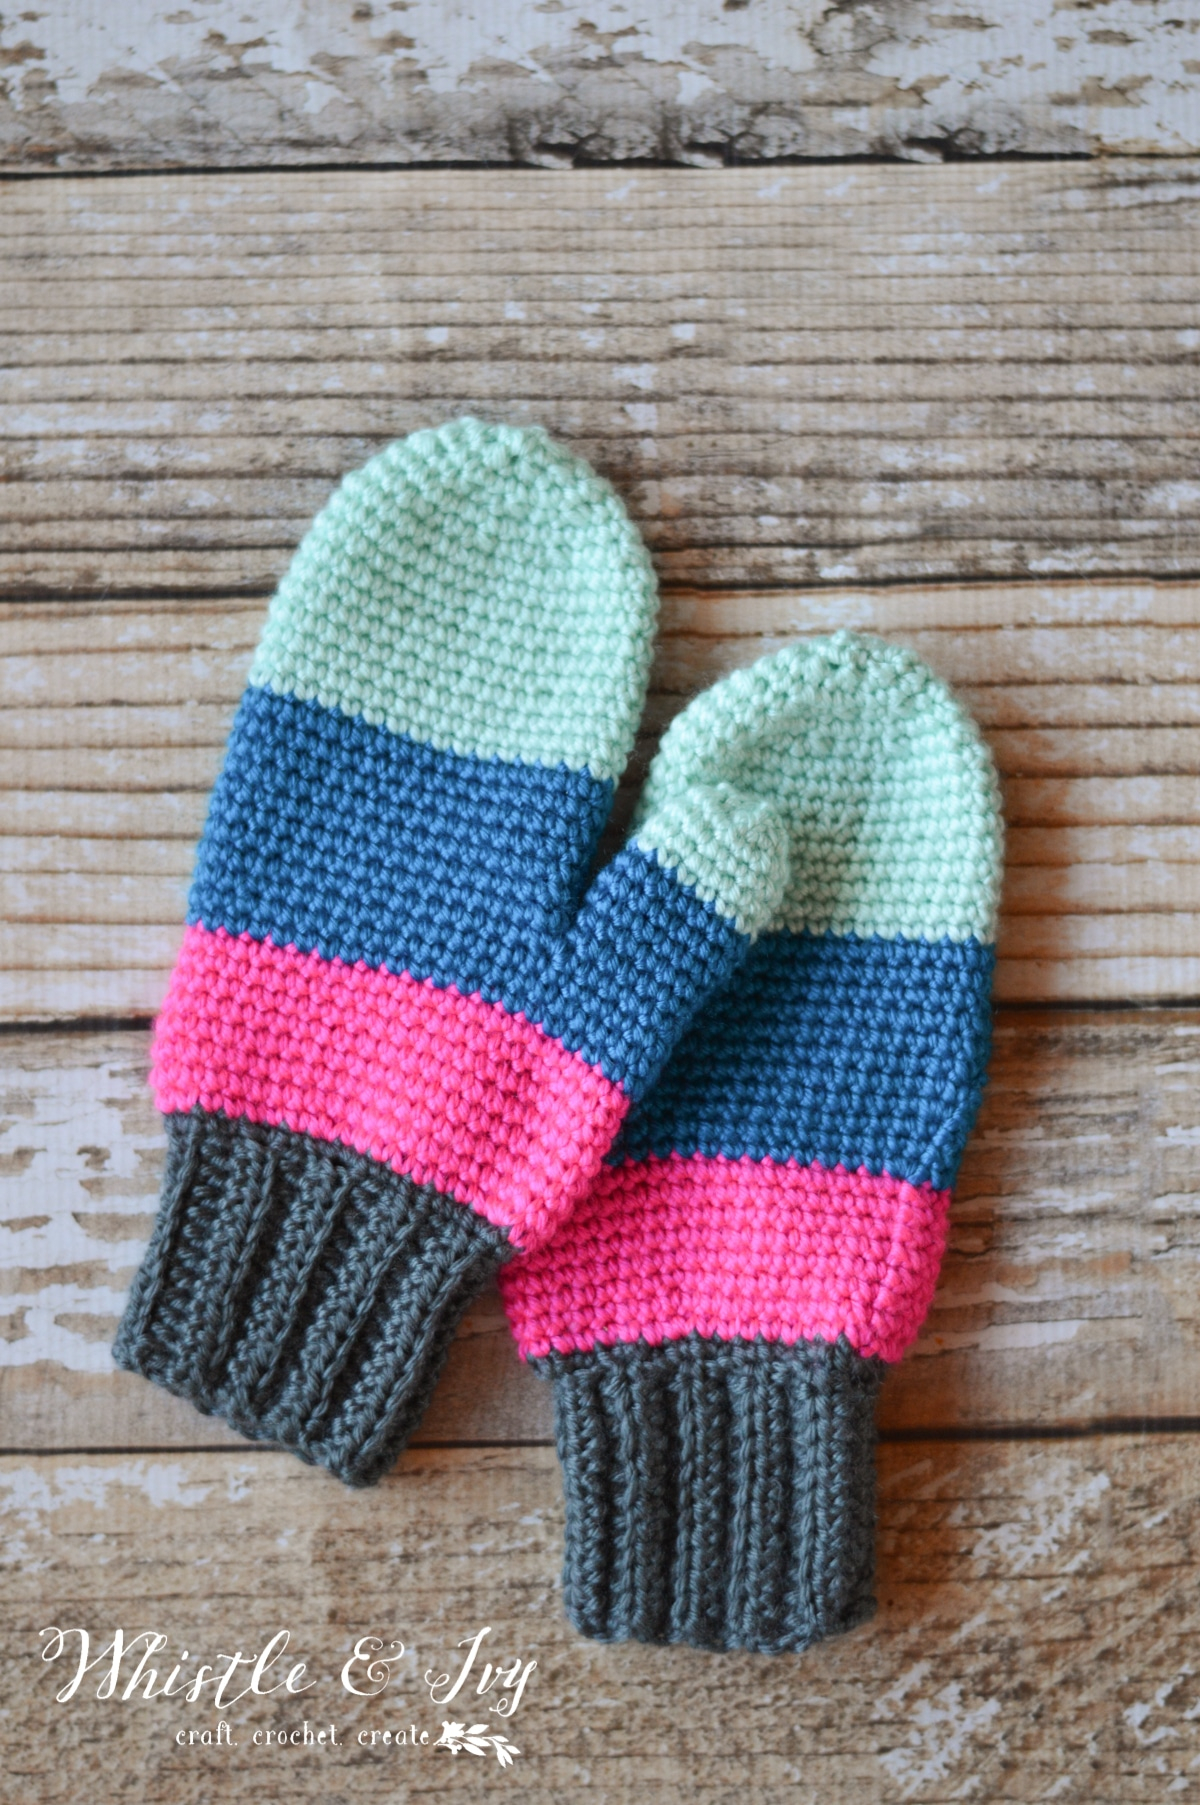 Crochet Mittens Free Pattern Crochet Color Block Mittens Whistle And Ivy